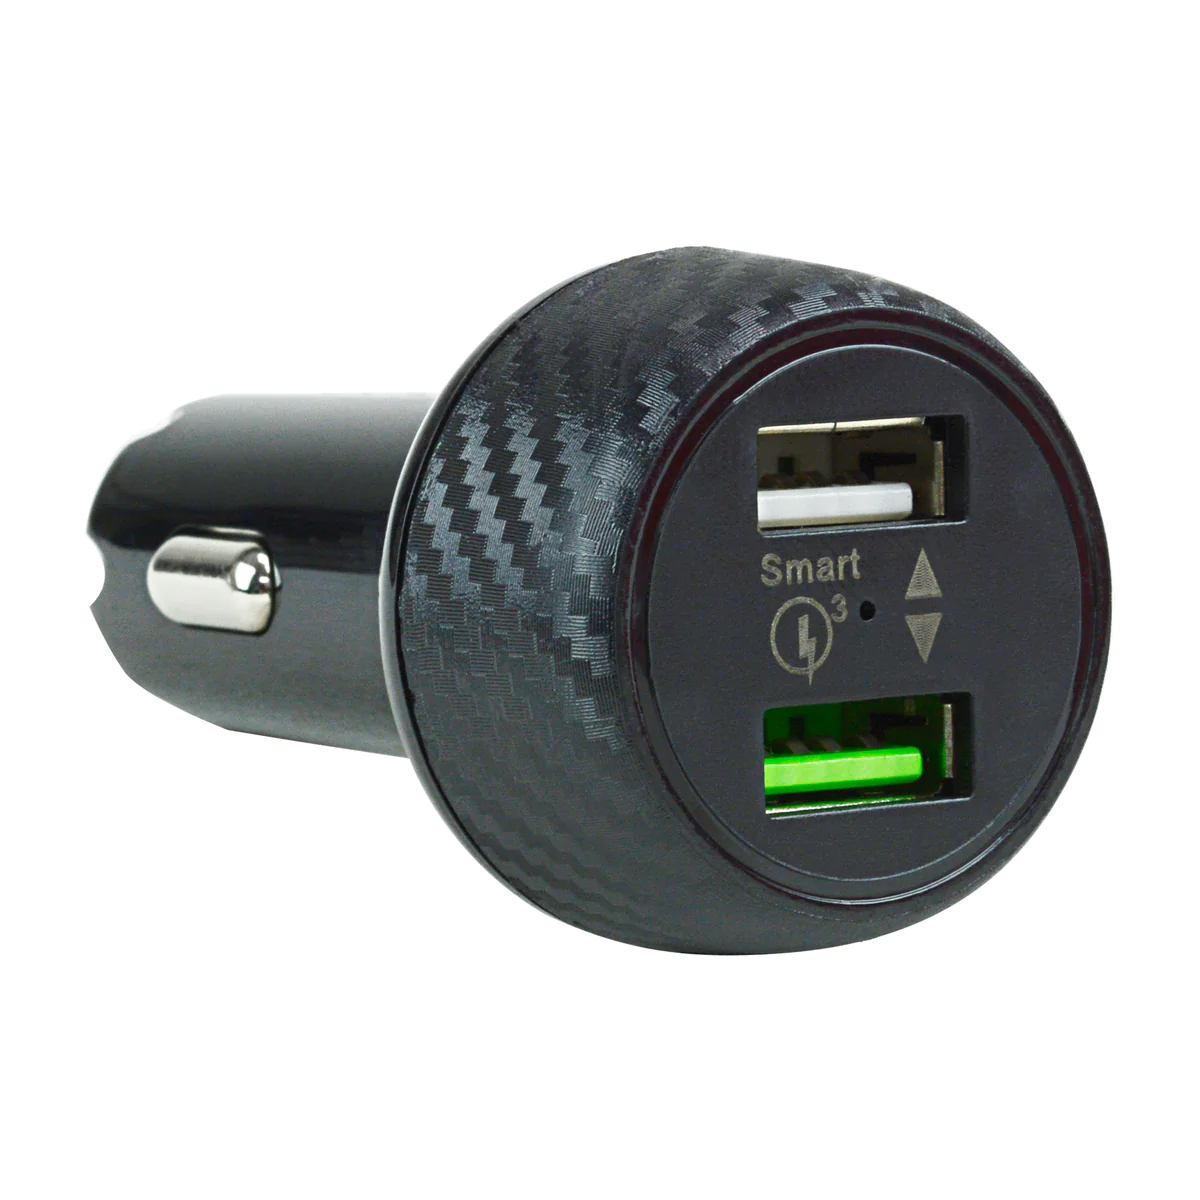 Picture of Audiopipe AIQDUCIGQC3 2.4A QC3.0 Plus USB A Dual USB Car Charger